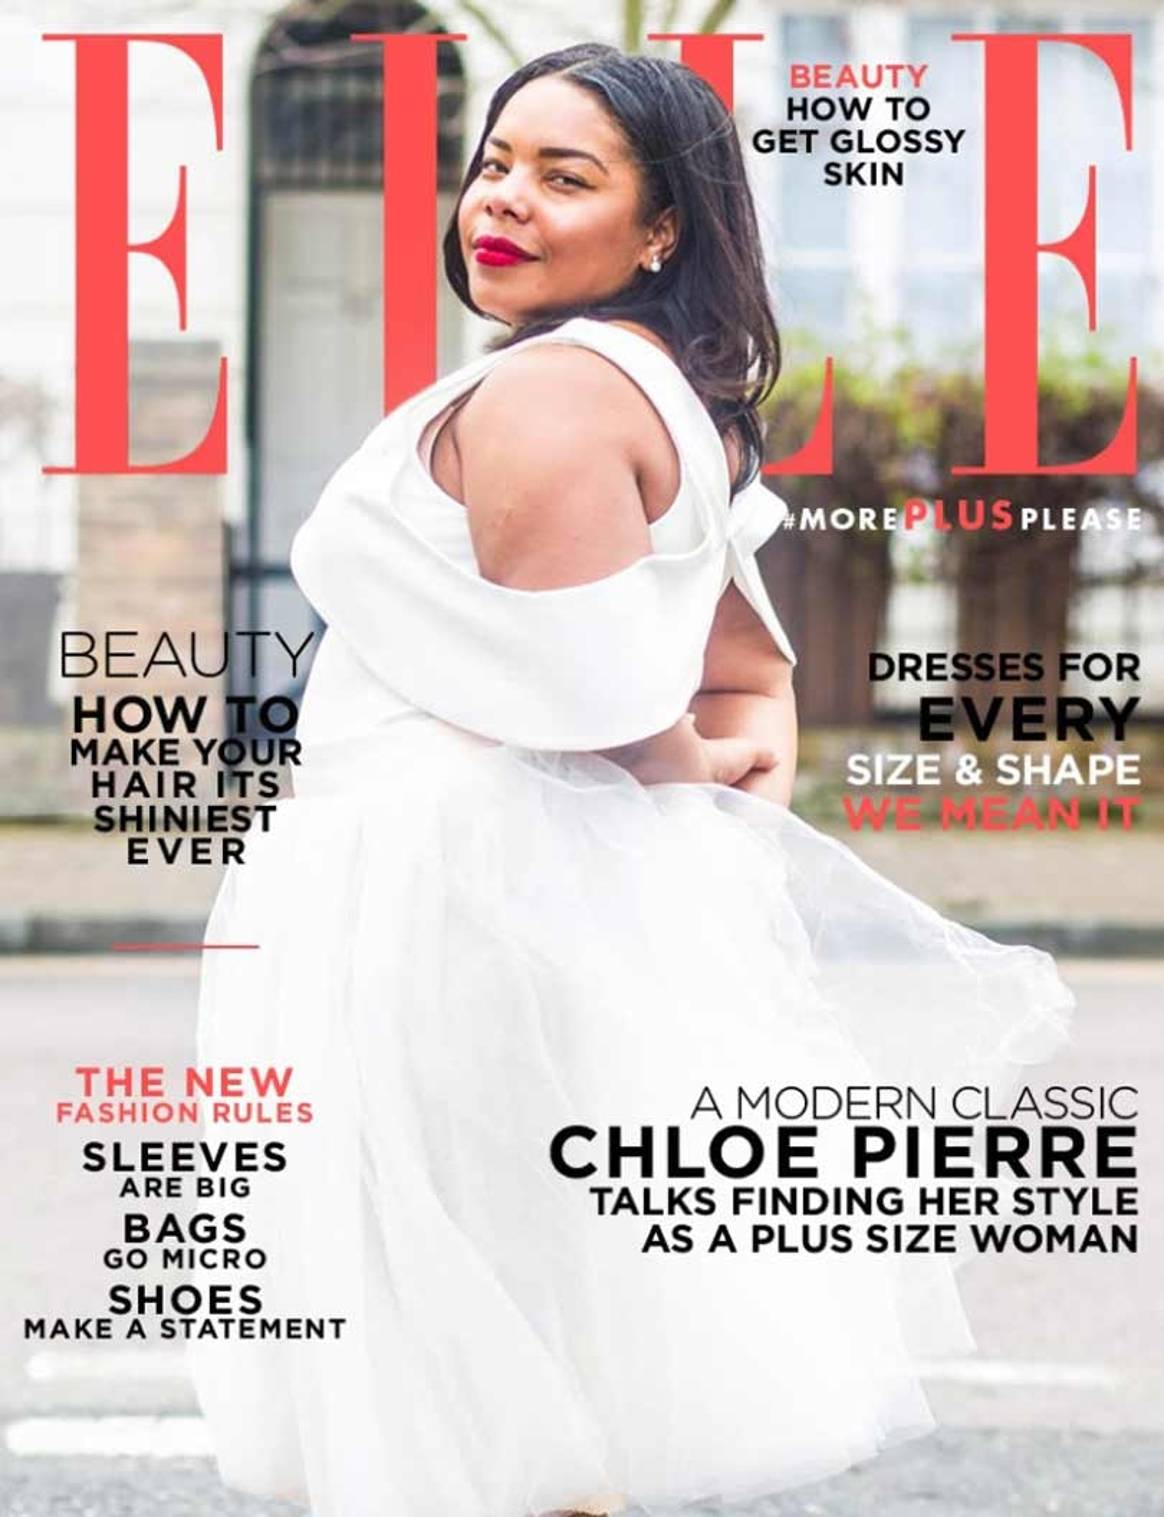 Navabi features plus size women on cover pages